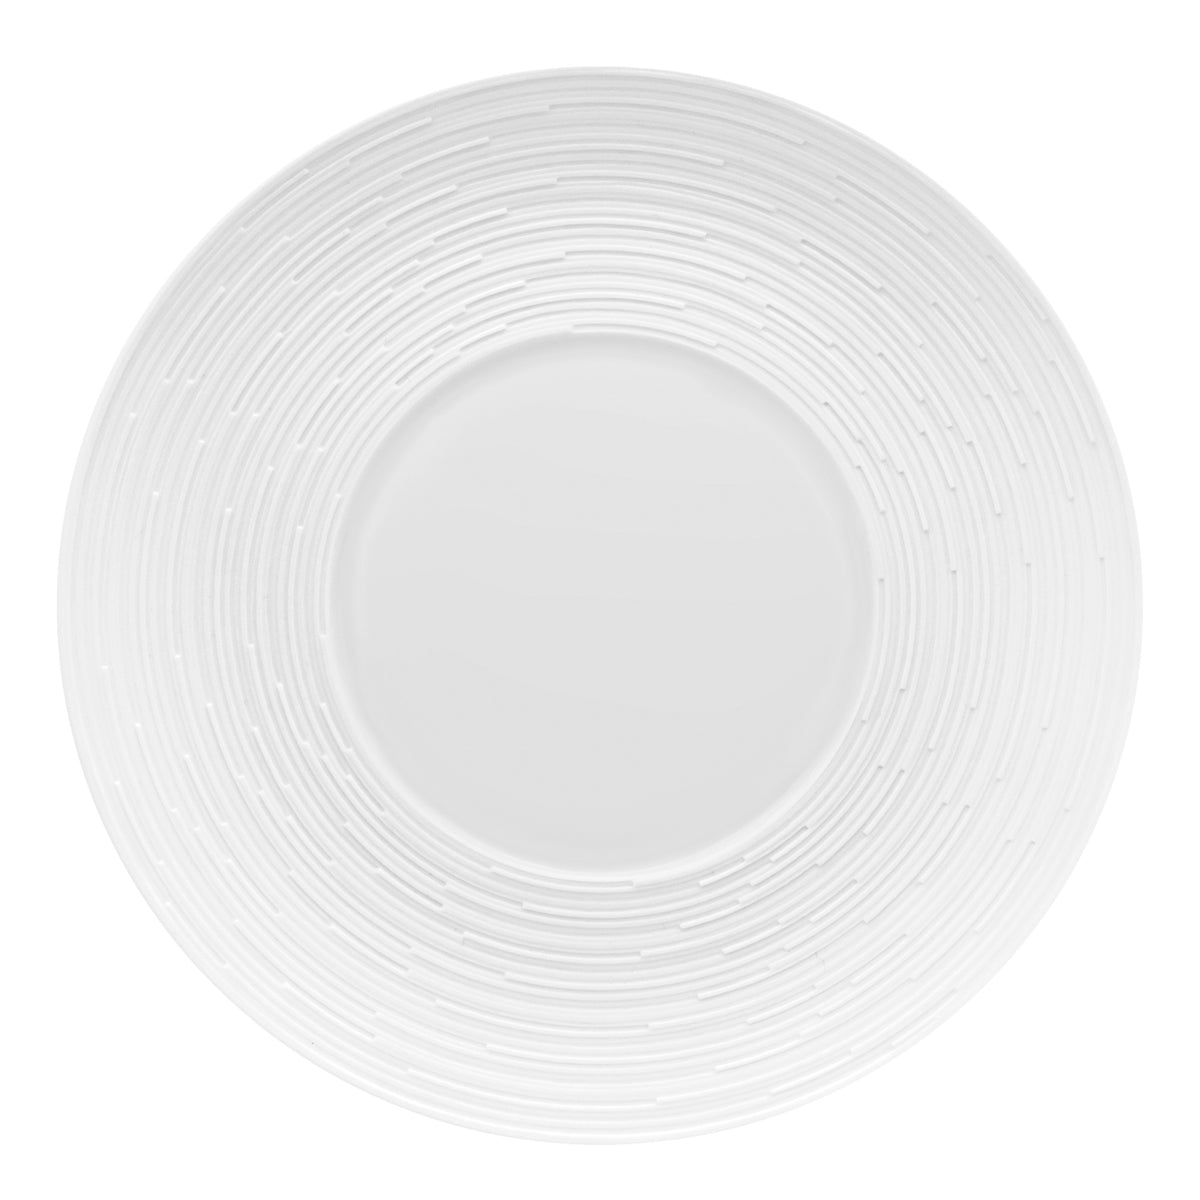 LABYRINTHE - Charger plate